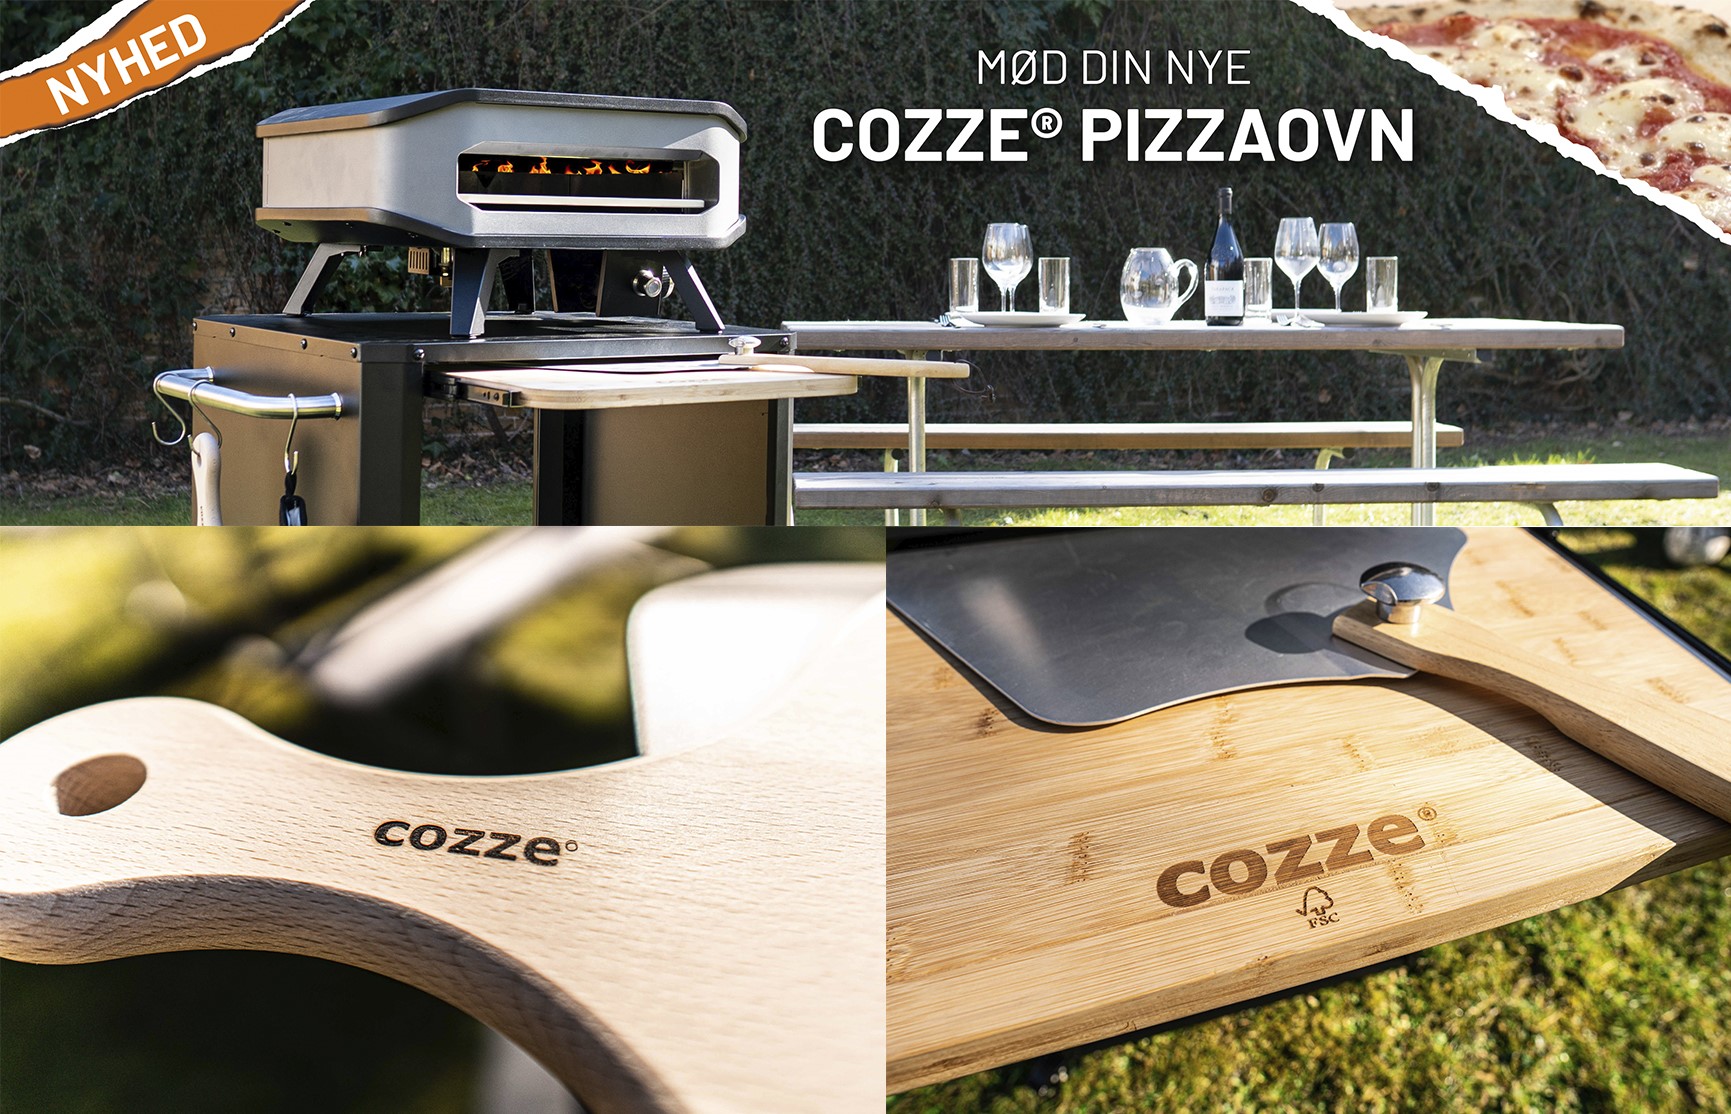 NEWS - The key to perfectly cooked pizza at home is the pizza oven from Cozze